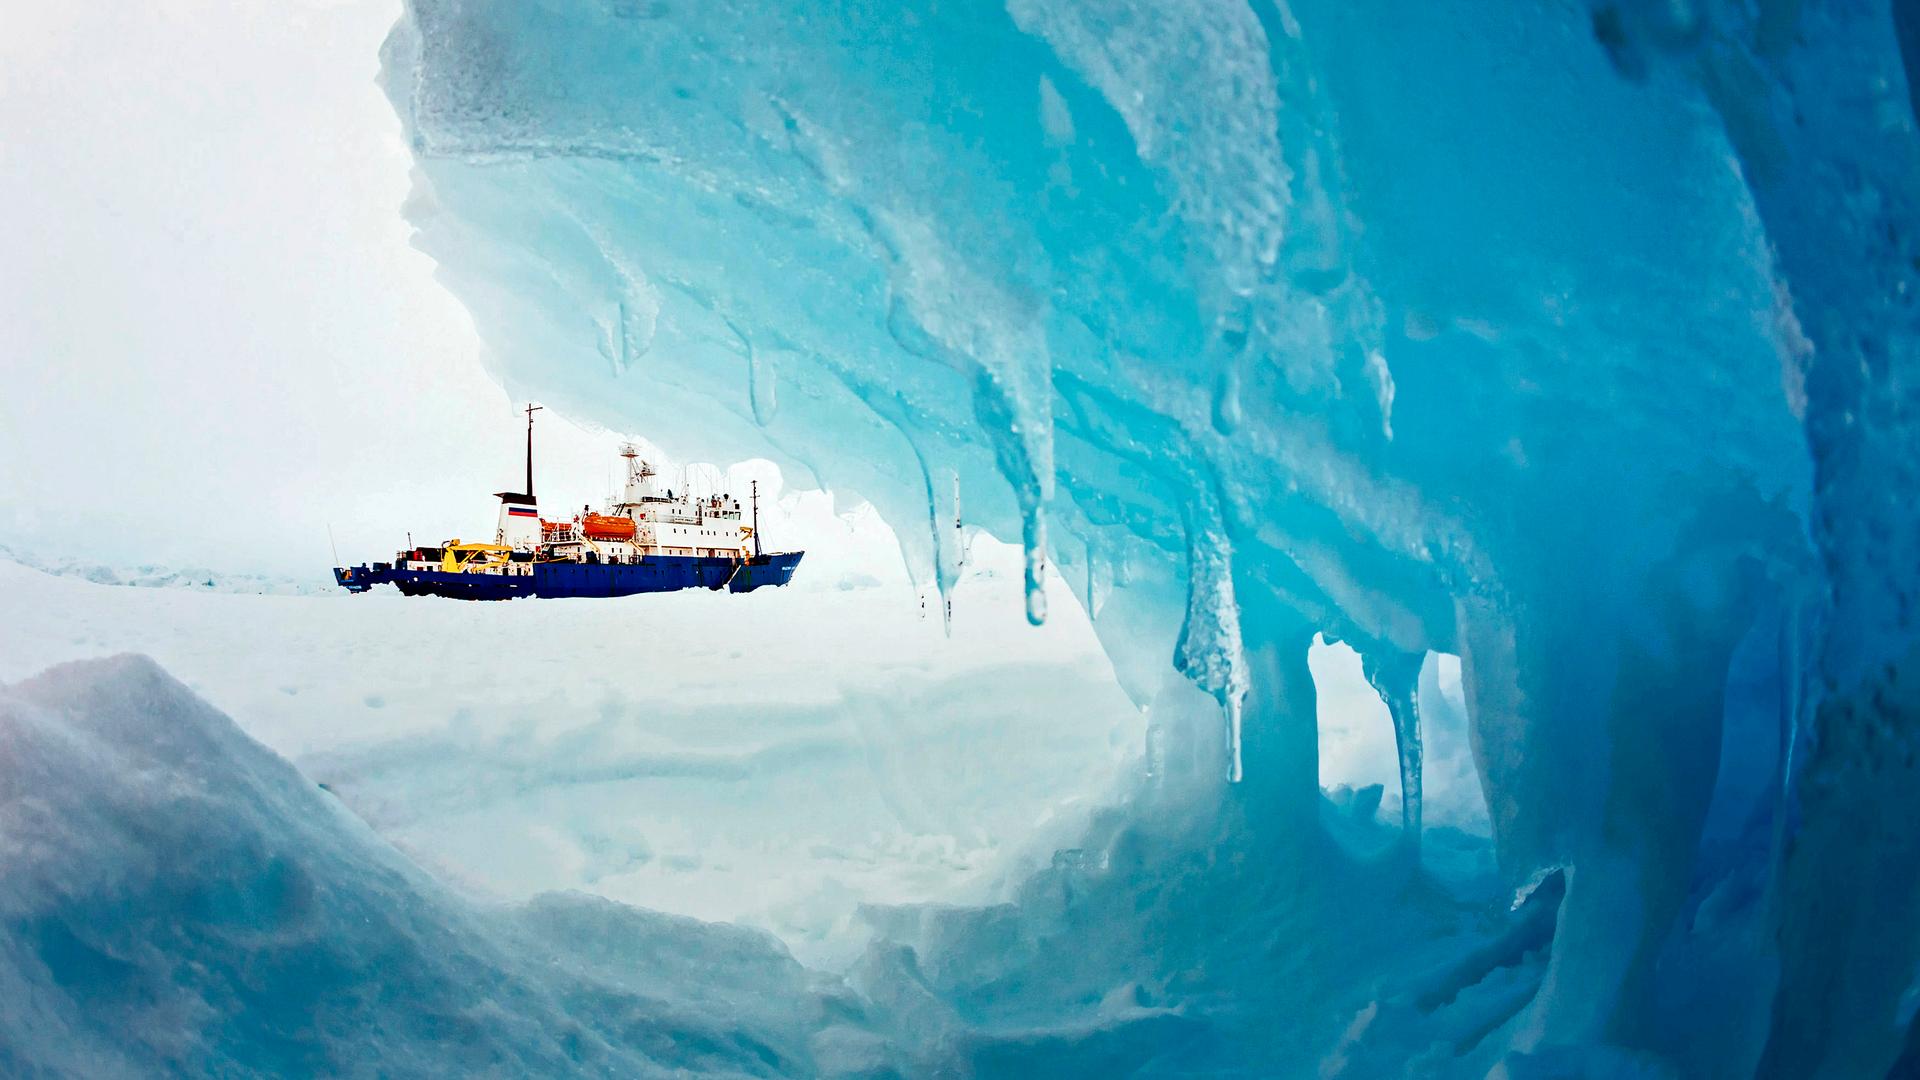 The MV Akademik Shokalskiy stranded in ice off Antarctica on December 29. After a blizzard finally cleared the Russian ship's 52 passengers were airlifted to a nearby icebreaker.